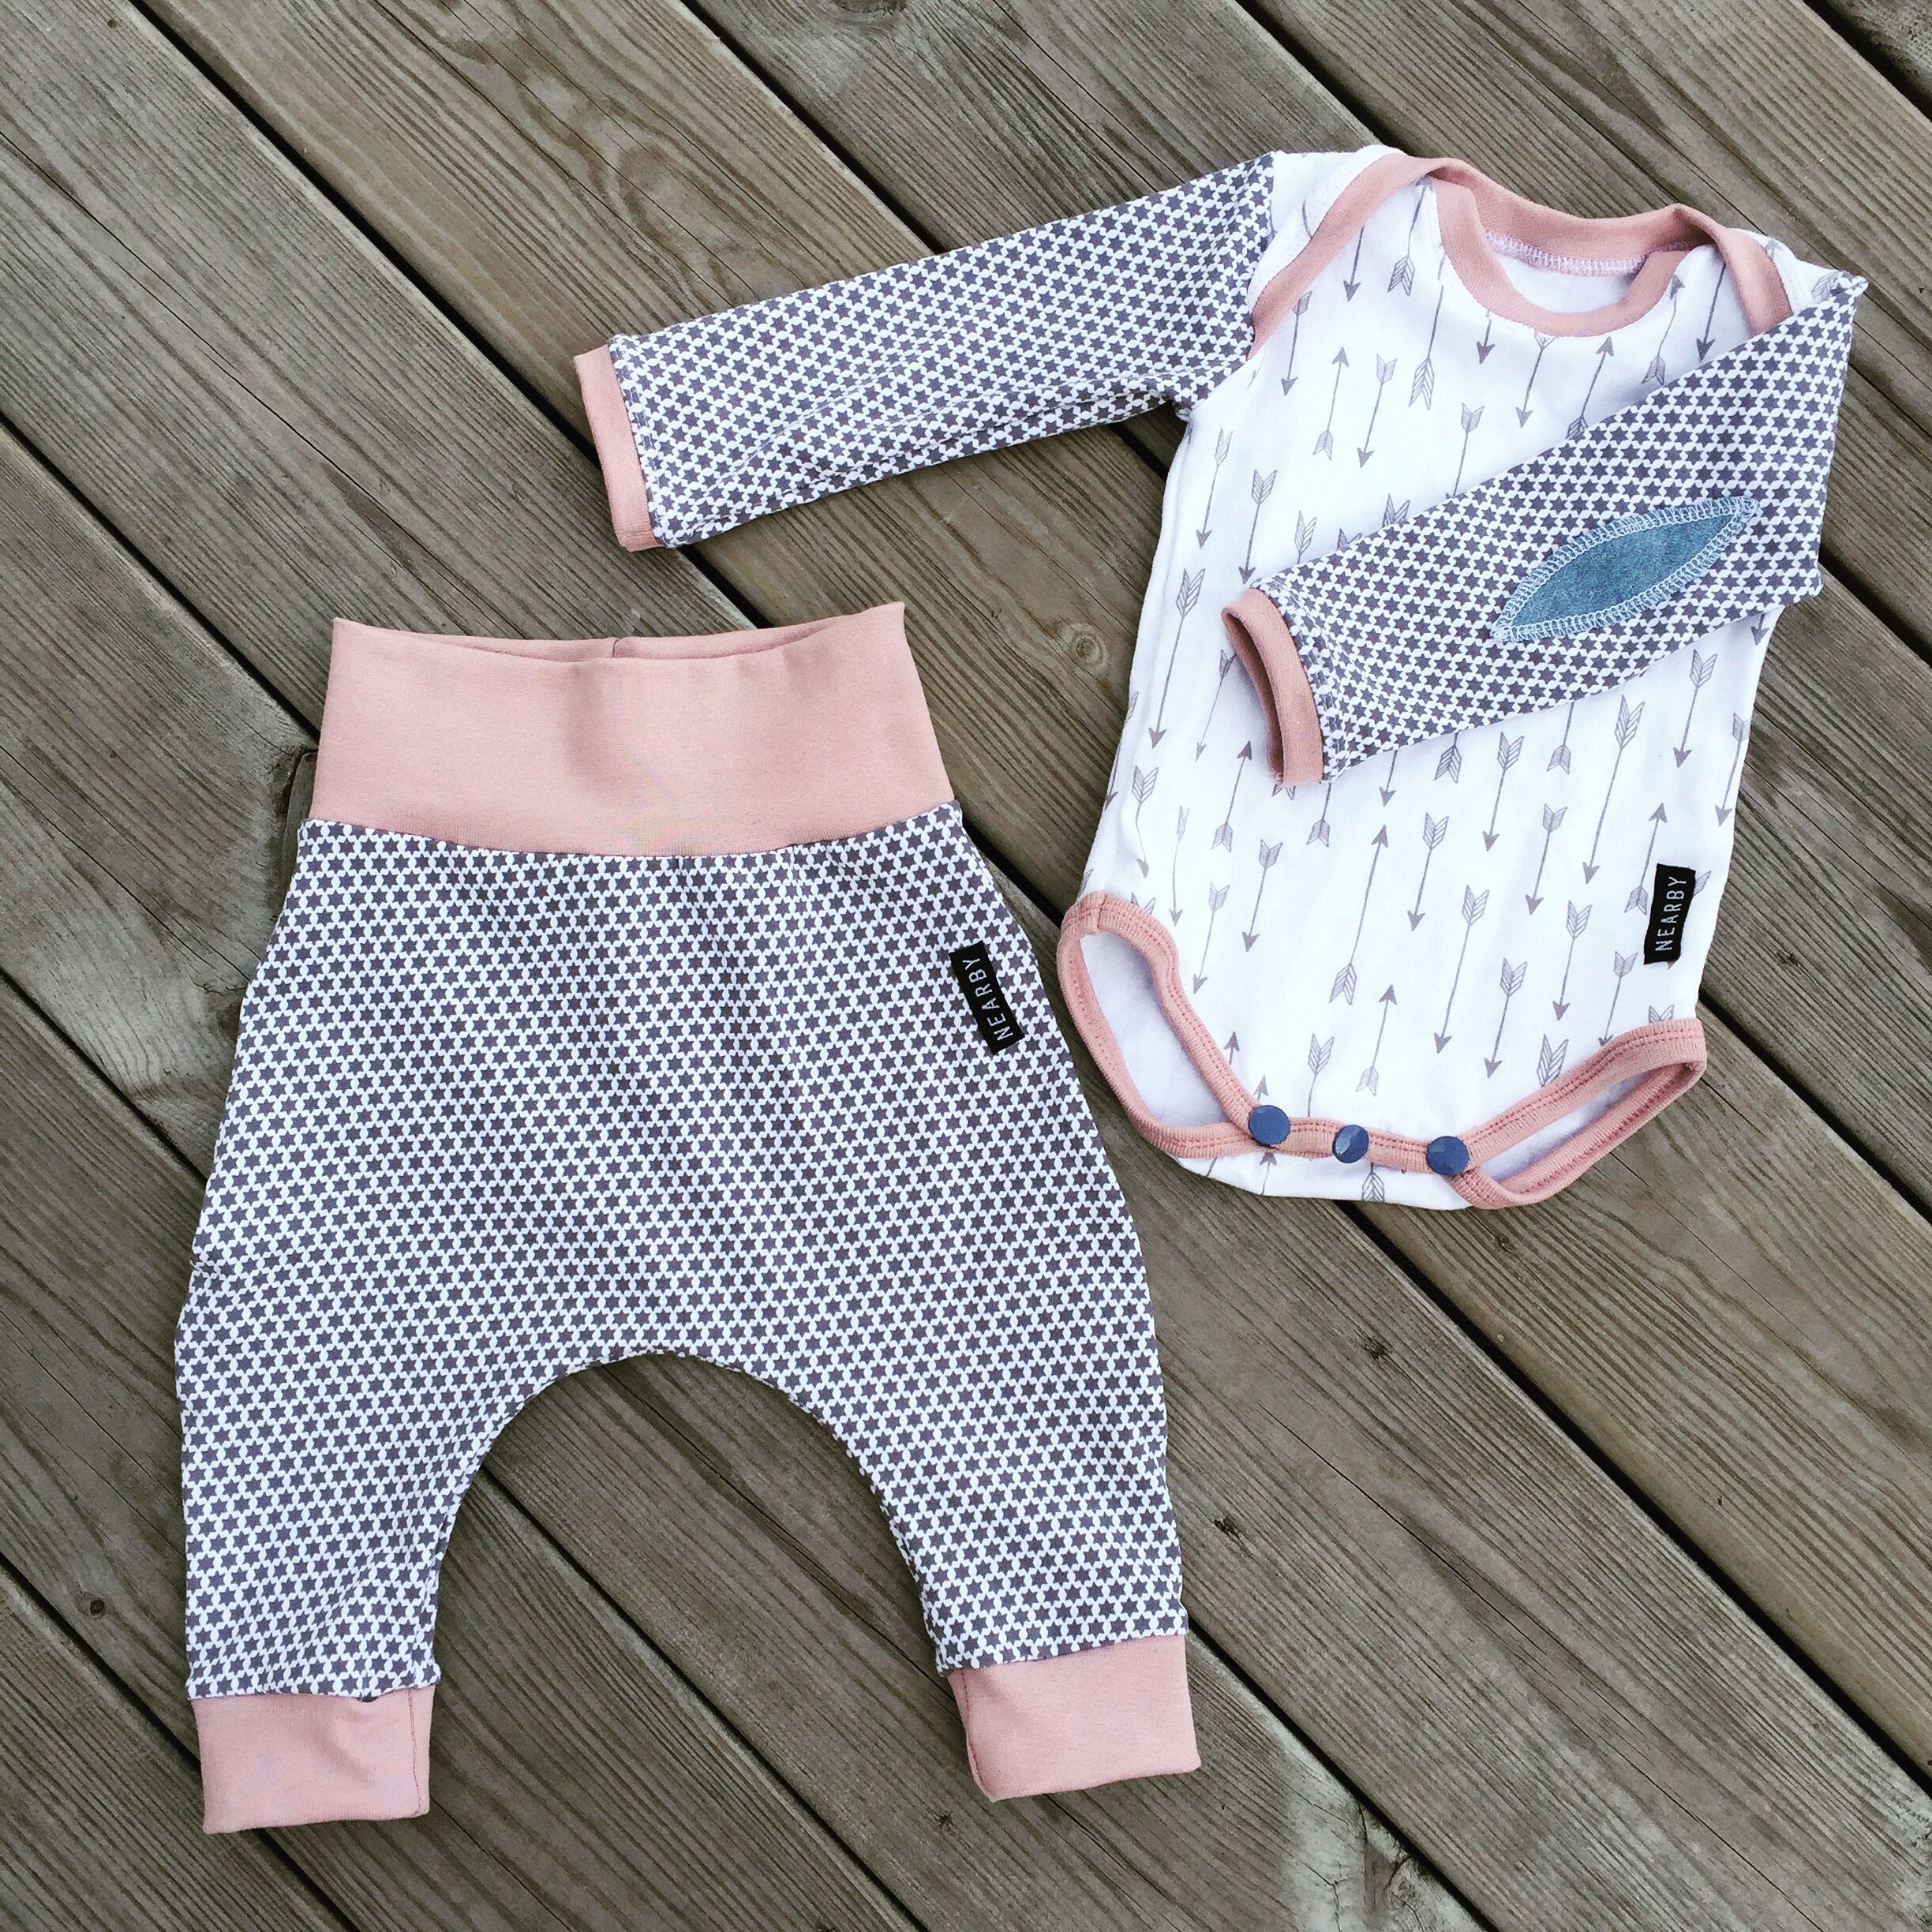 Free Sewing Patterns For Baby Love This Free Pattern This Ba Onepiece Is So Fun To Sew You